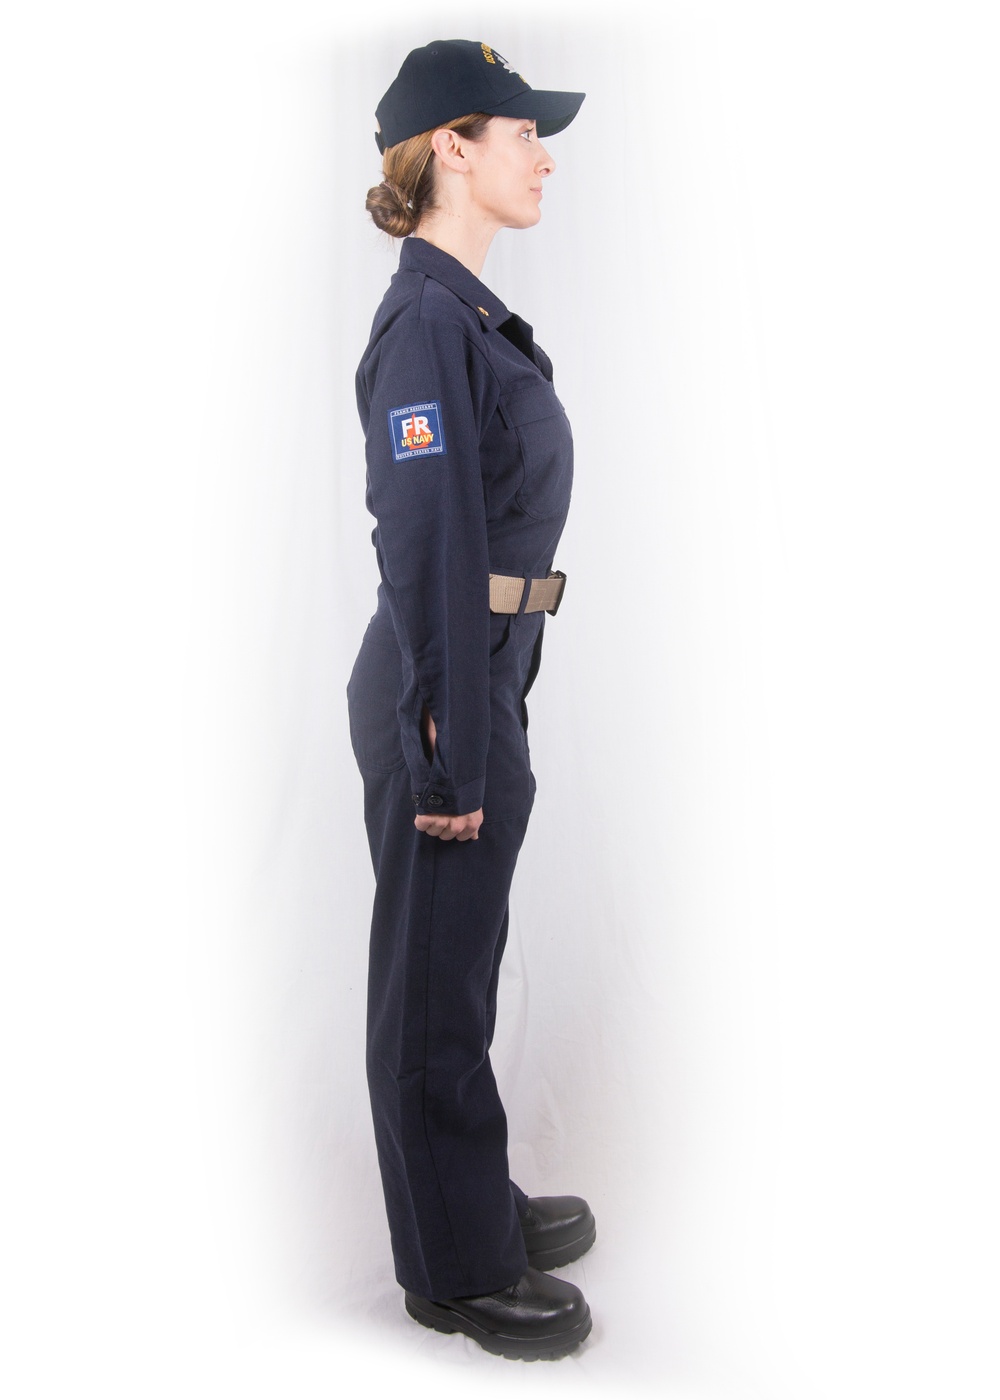 USFF announces Improved Fire Retardant Variant Coverall